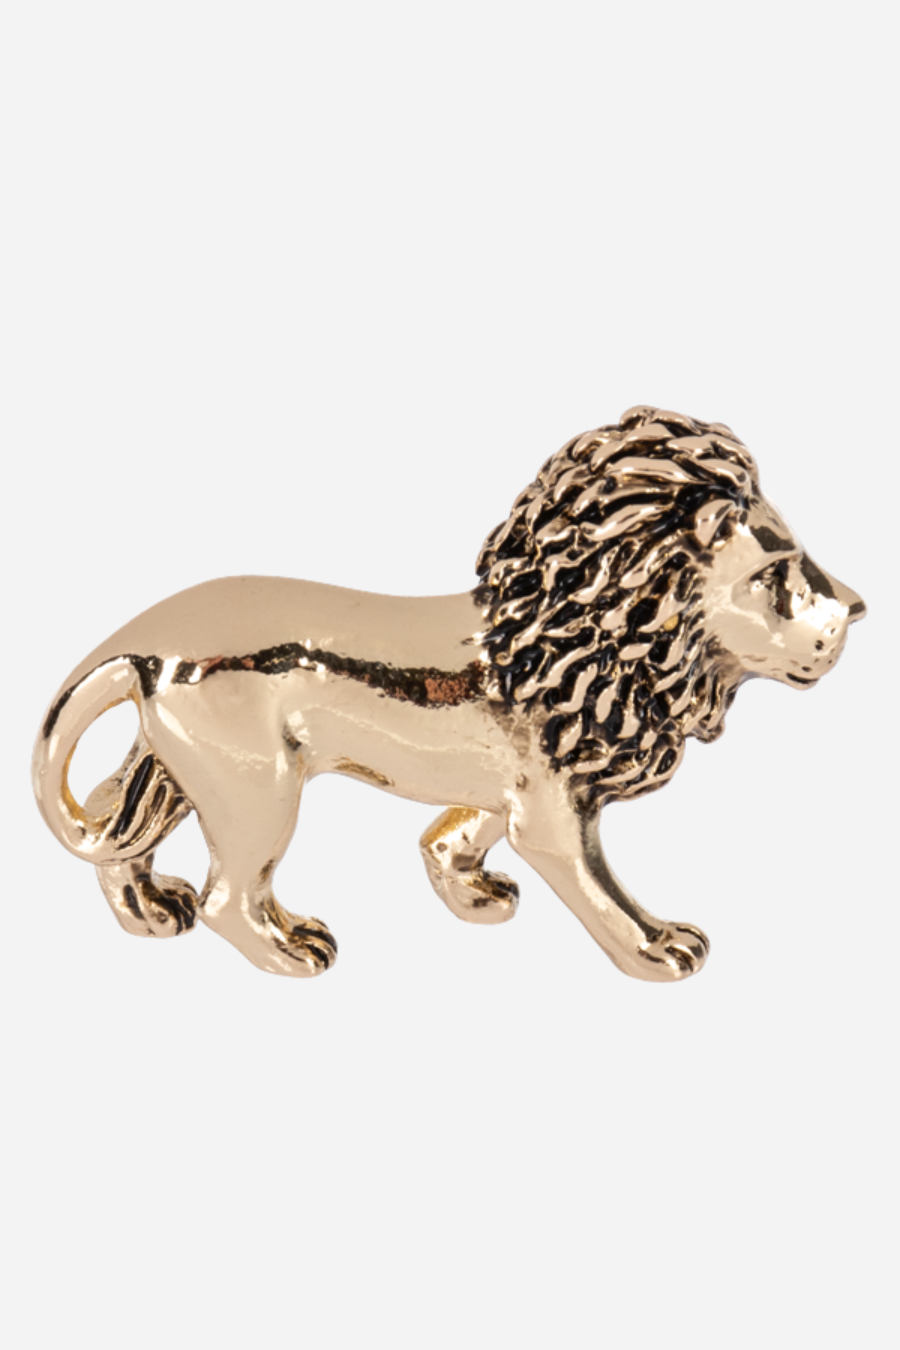 Be Brave & Courageous - Lion Charm